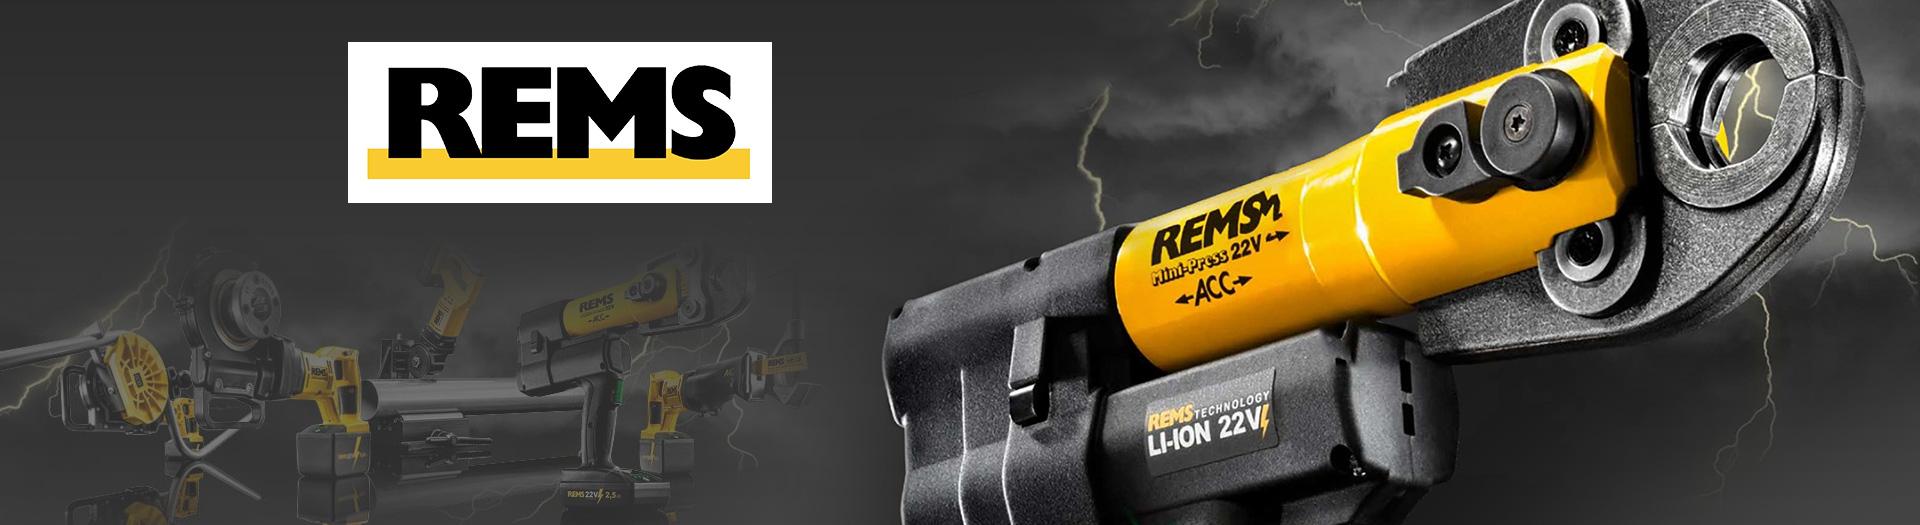 REMS Tools UK - Preferred Supplier